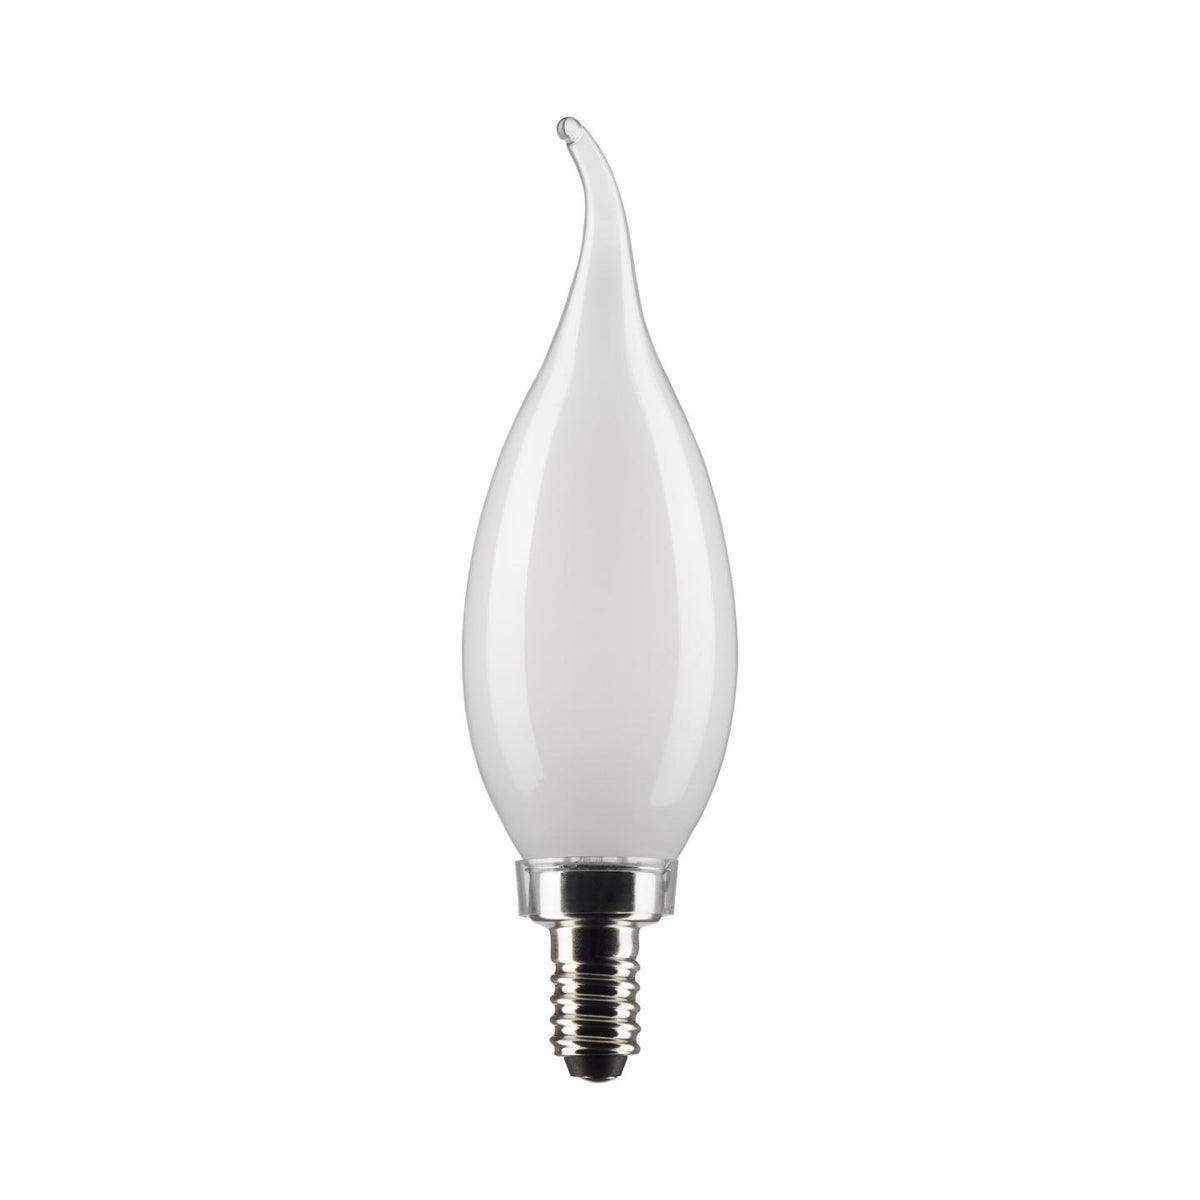 CA10 Candle LED Bulb, 60W Equivalent,6 Watt, 500 Lumens, 2700K, E12 Candelabra Base, Frosted Finish, Pack Of 2